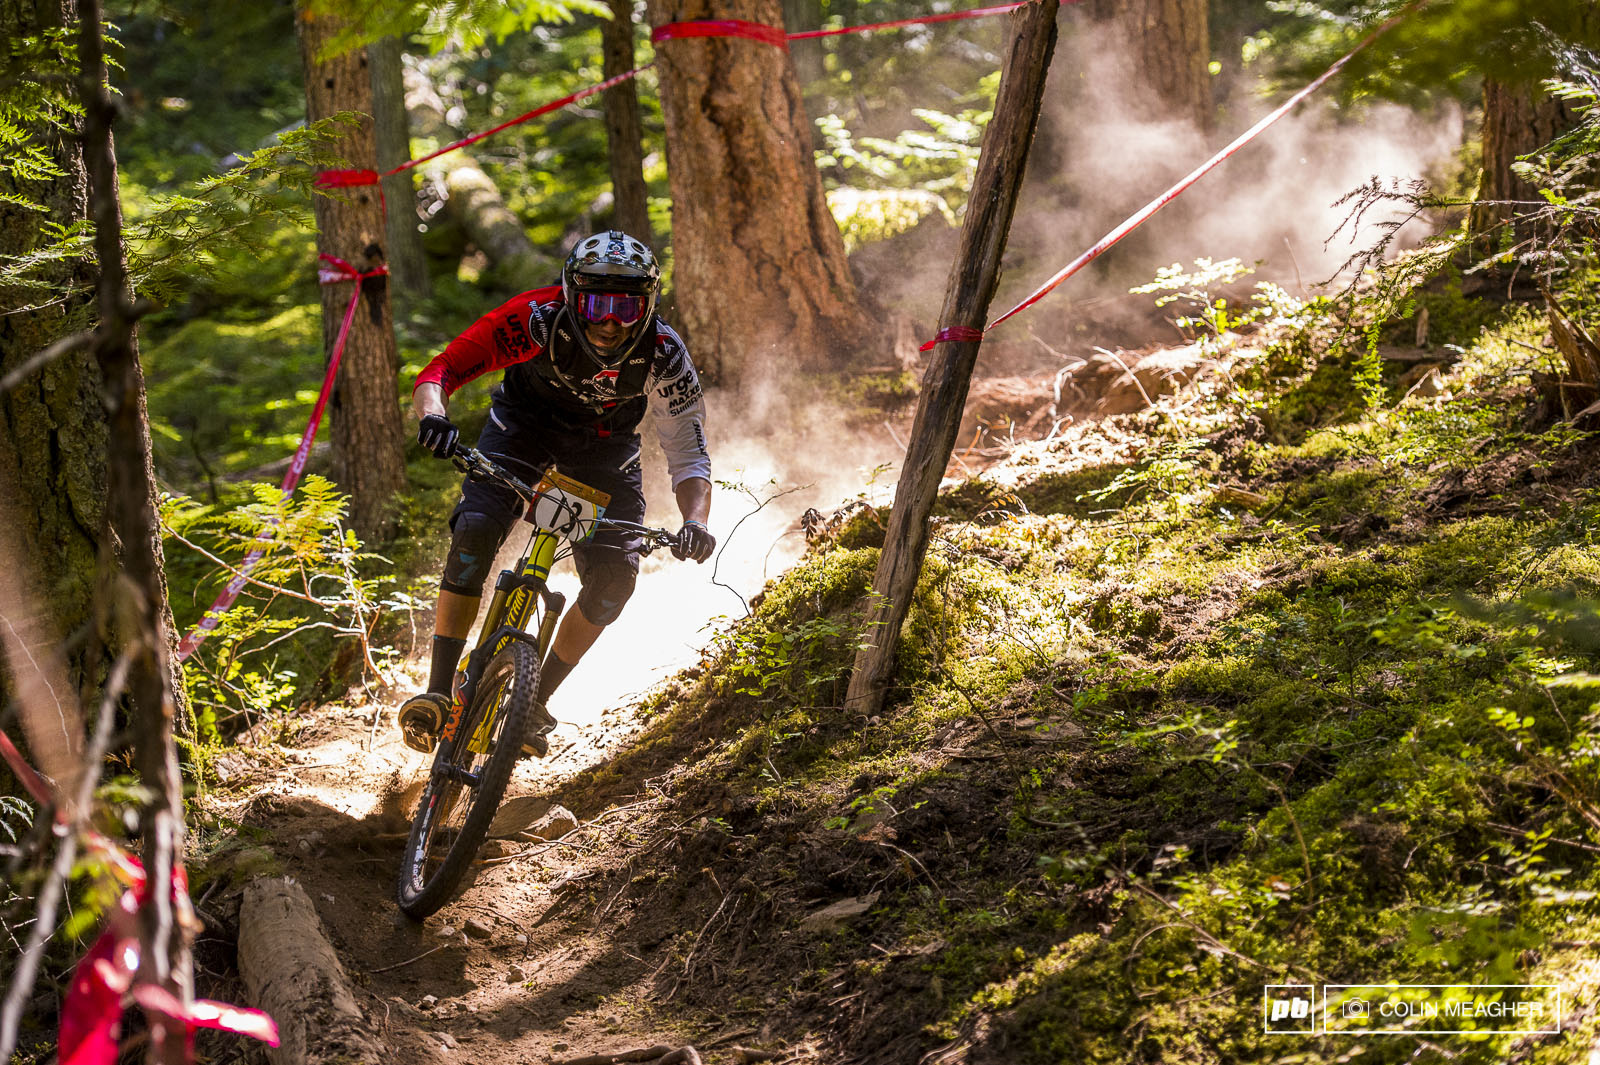 Lucky number 13 Florian Nicolai ripping the loamy goodness of stage one aka Microclimate.